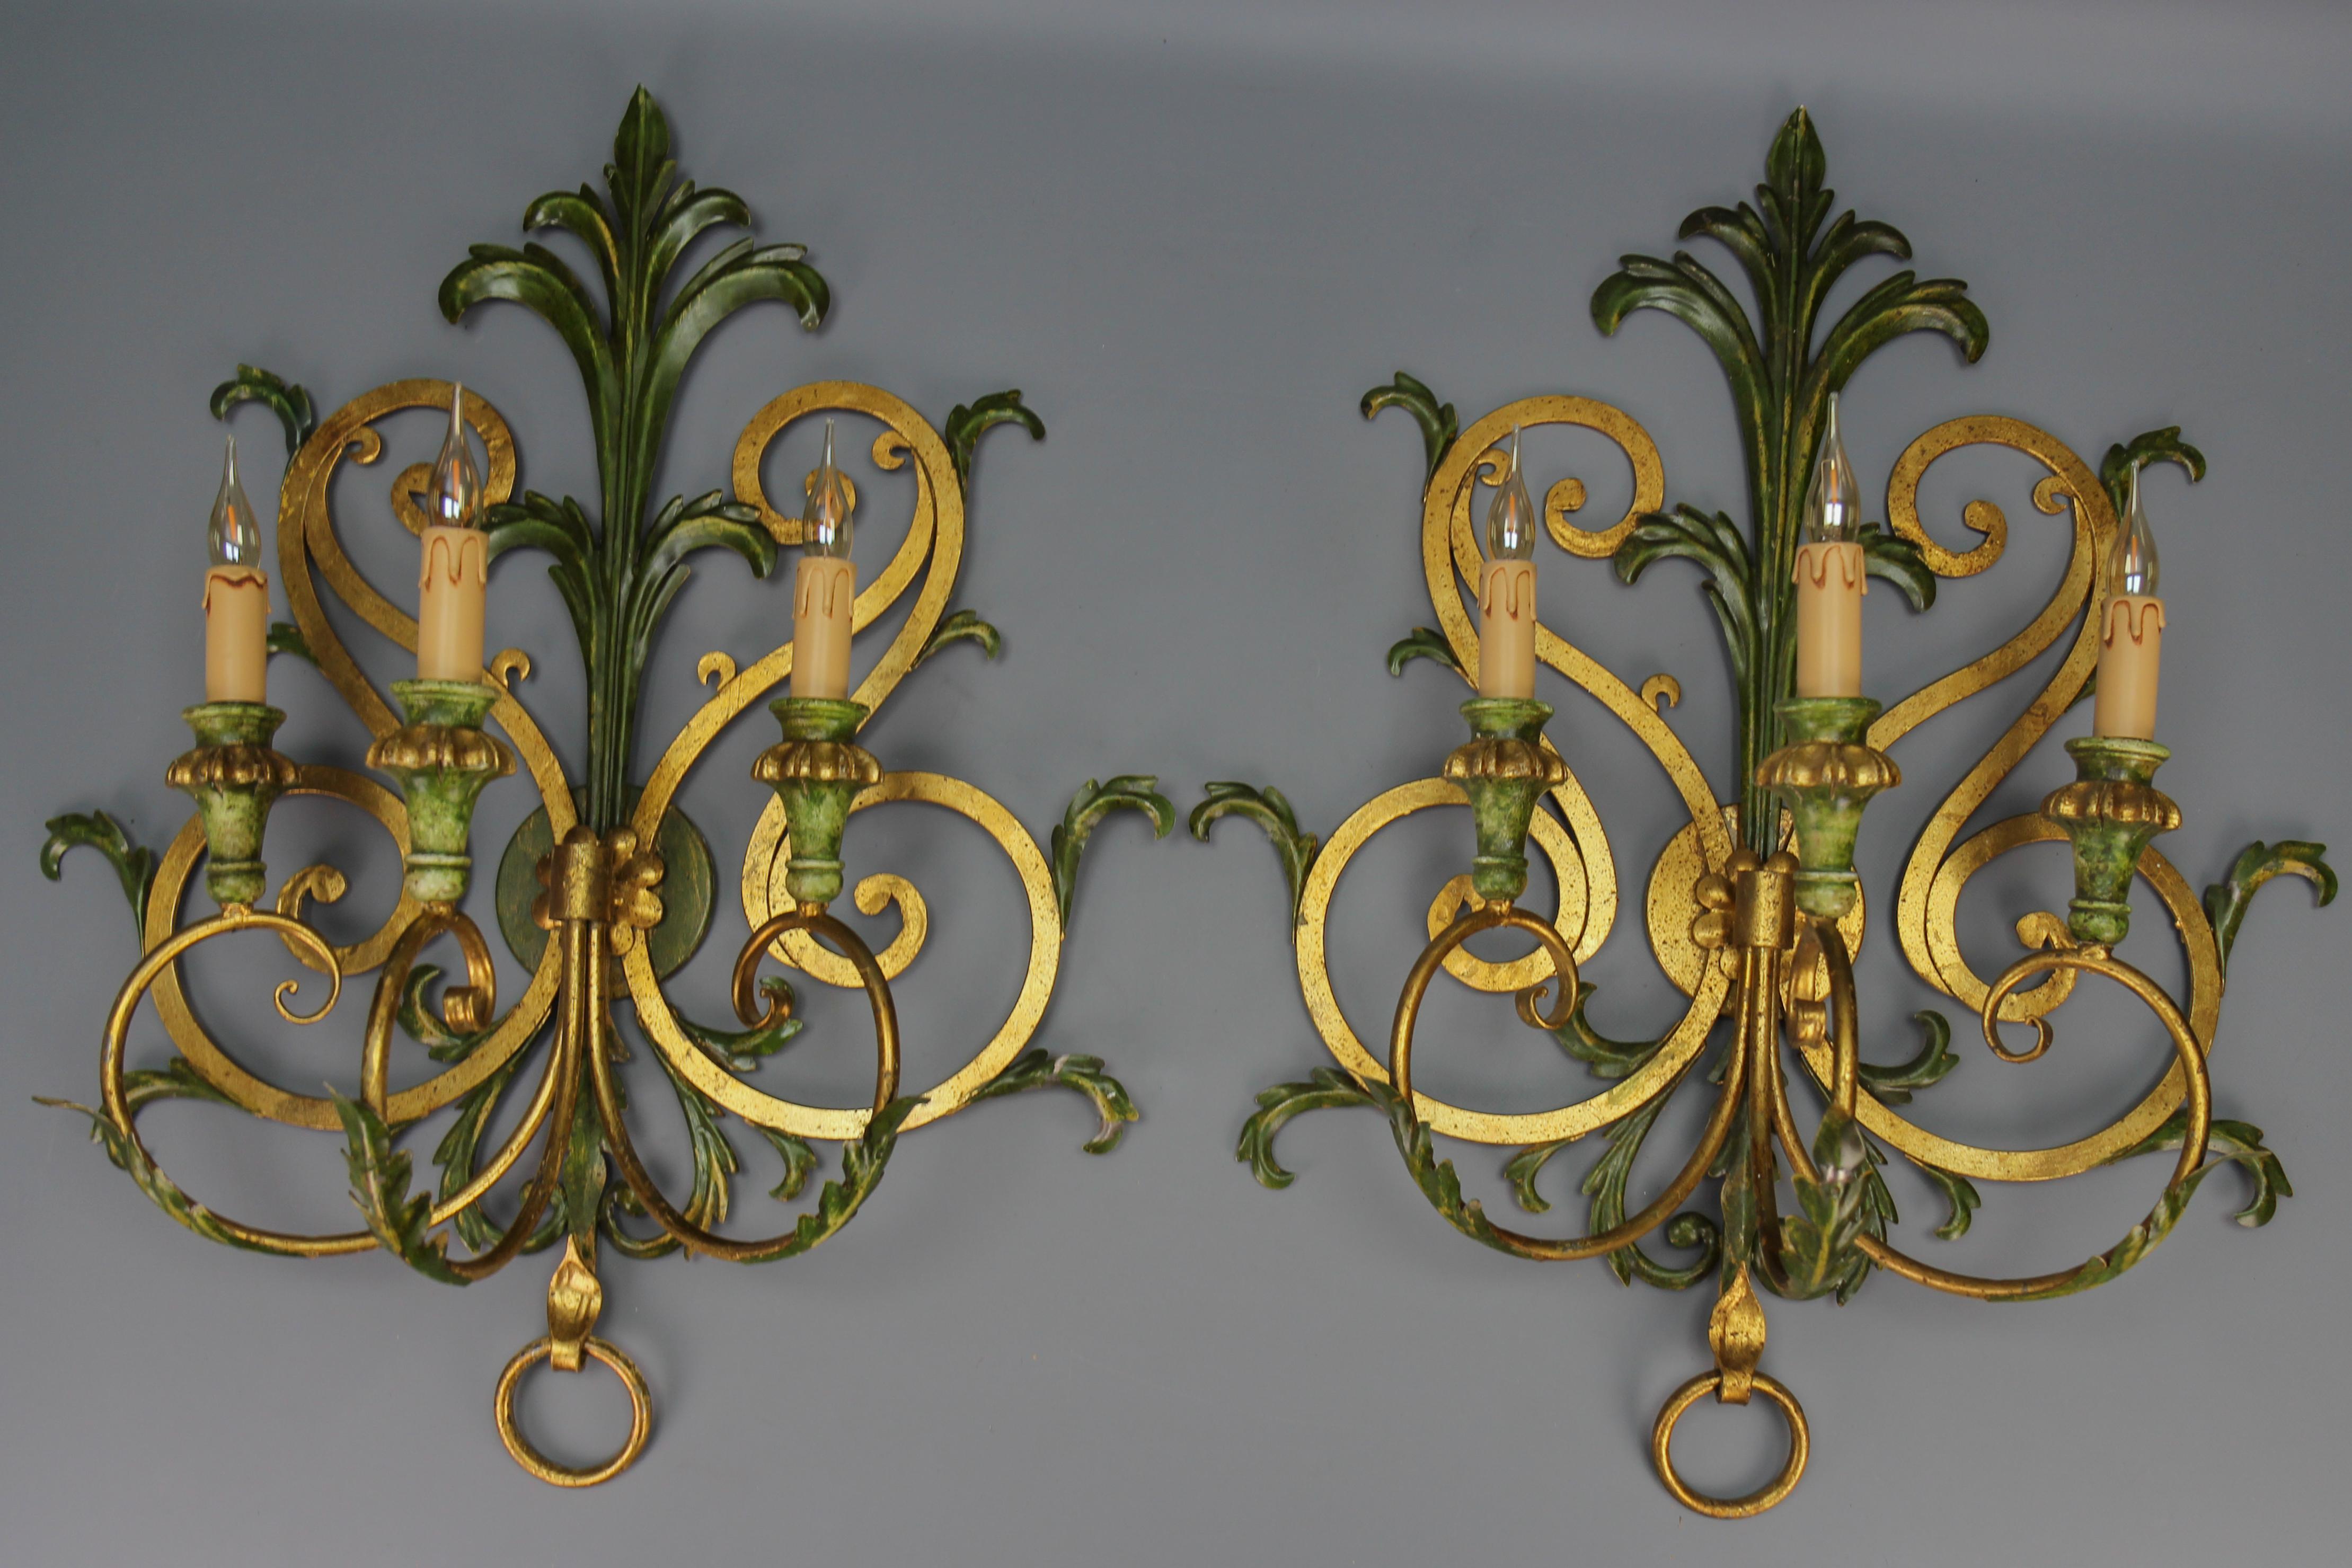 A pair of large gilt and green color metal and wood sconces, Italy, ca. the 1960s.
This impressive pair of Baroque-style sconces features gilt and green-colored metal frames and wooden elements (parts of arms), adorned with scroll and leaf decors.